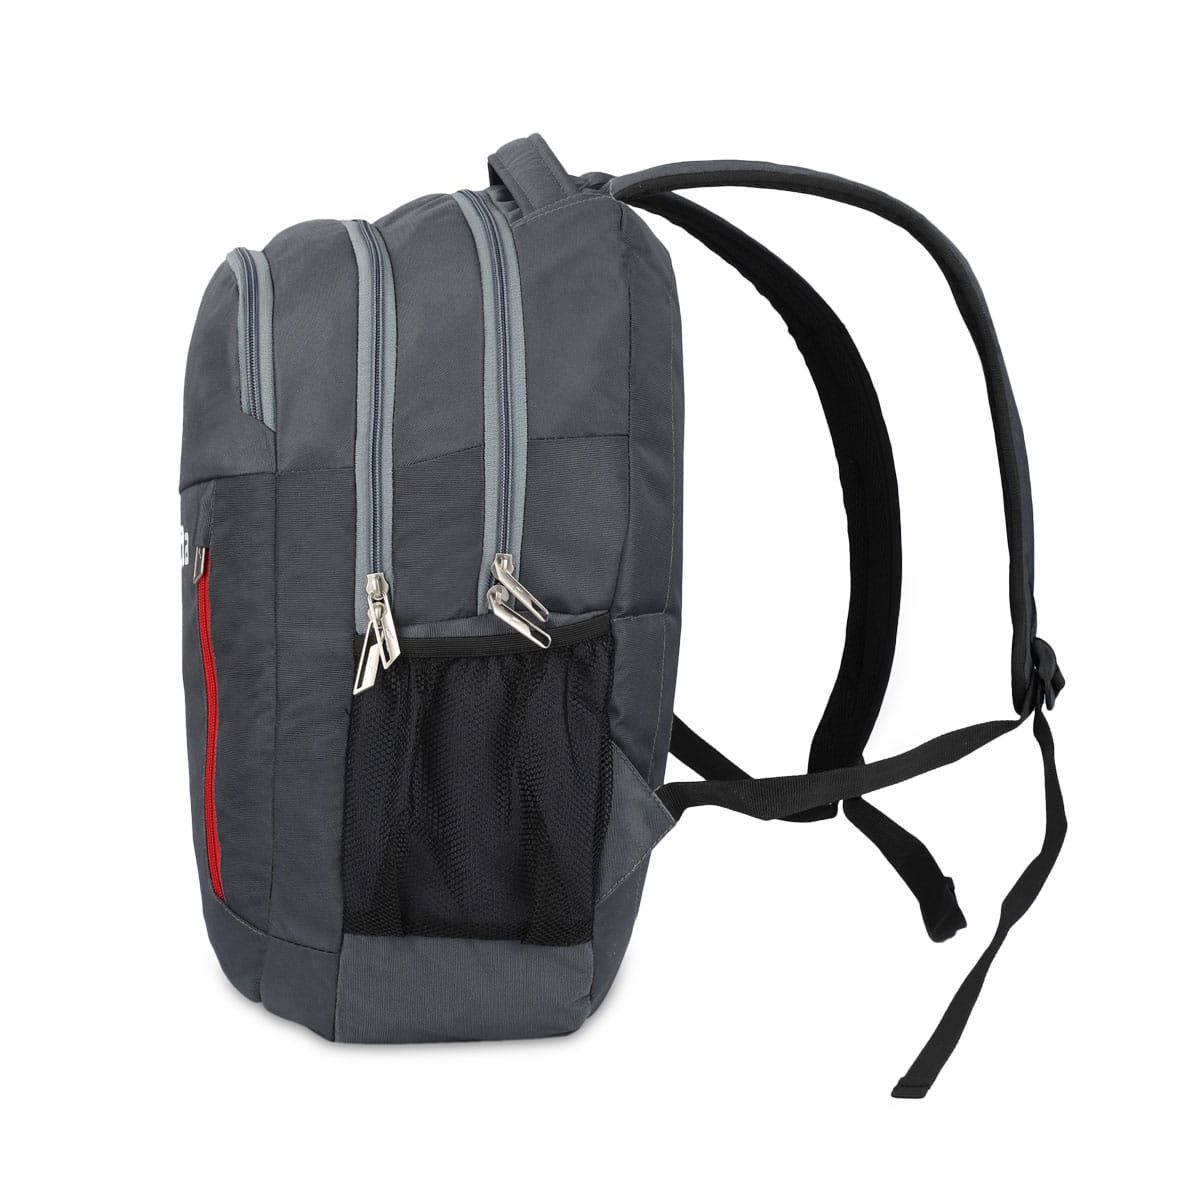 Grey| Protecta Twister Laptop Backpack-2